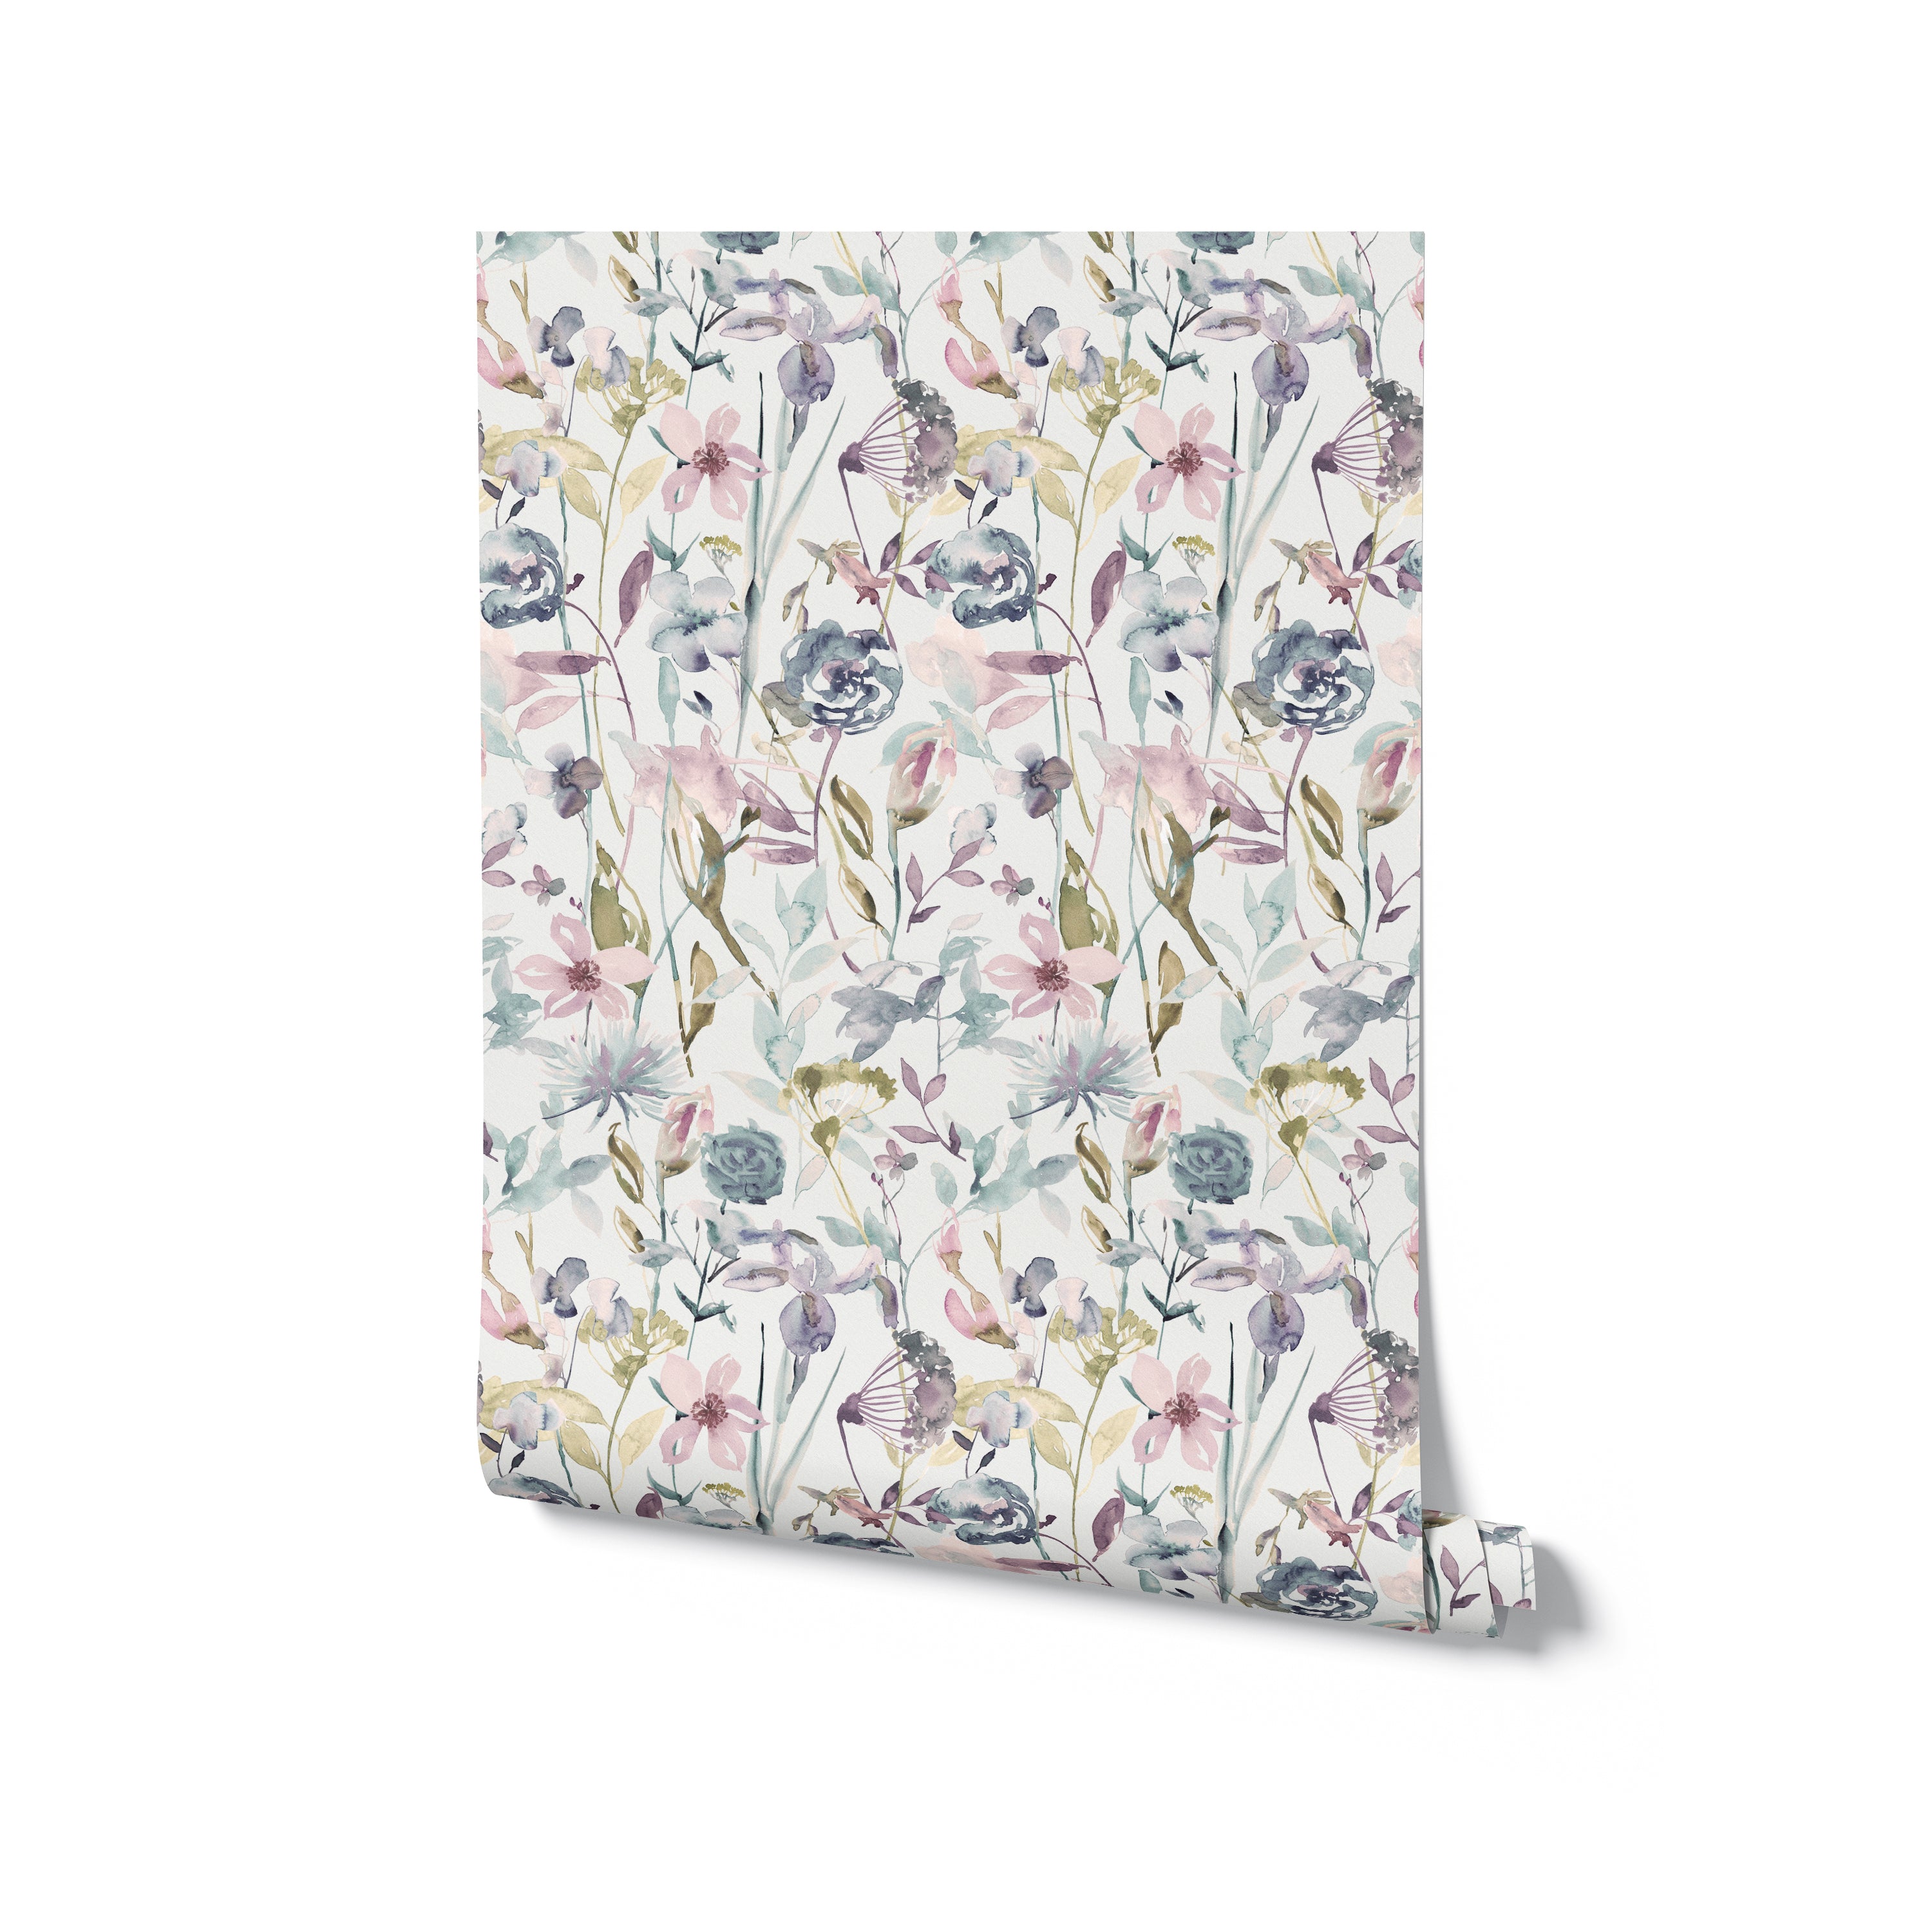 A rolled-up piece of Watercolour Meadow Wallpaper stands vertically against a white background. The wallpaper displays a beautiful and intricate pattern of watercolor flowers in pastel tones, ideal for adding a soft and elegant aesthetic to any room.